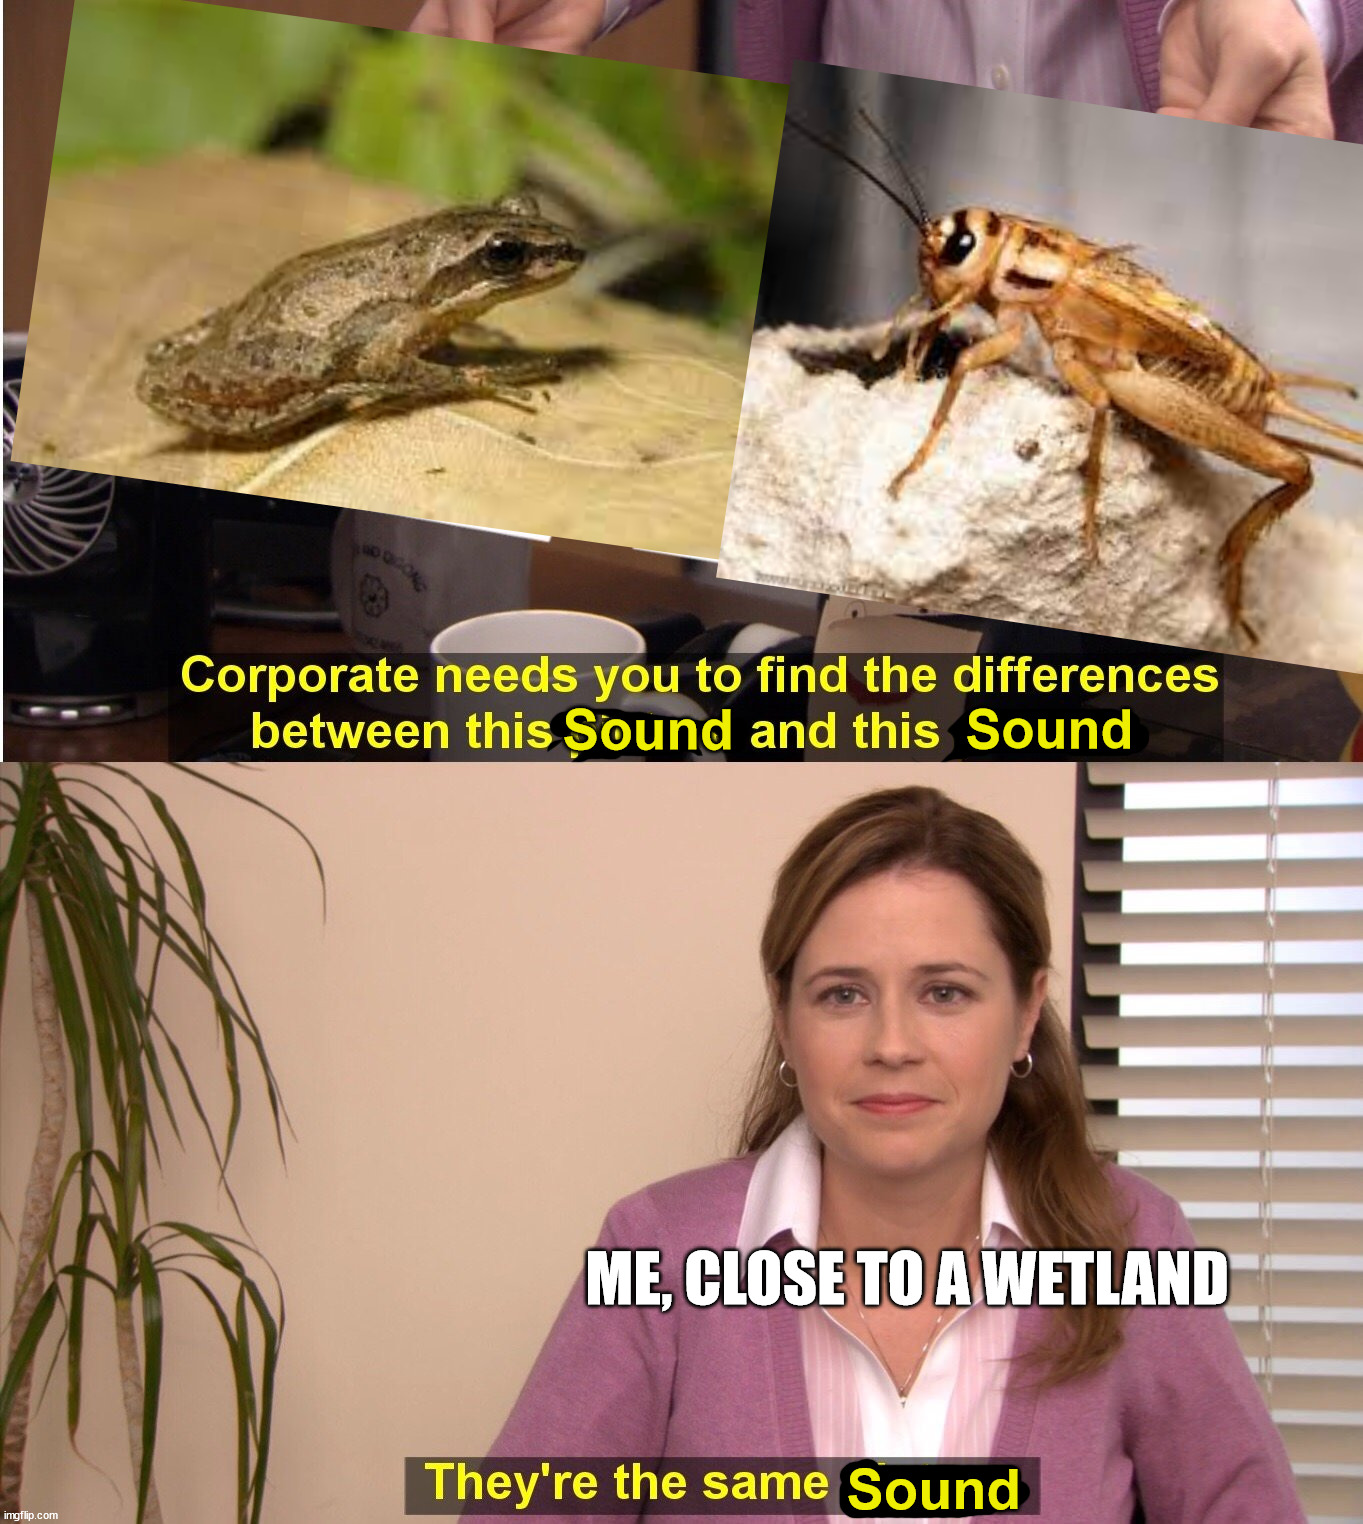 Chorus tree frog sound VS cricket sound | Sound; Sound; ME, CLOSE TO A WETLAND; Sound | image tagged in memes,they're the same picture,they're the same sound,frog,criquet,chorus tree frog sound vs cricket sound | made w/ Imgflip meme maker